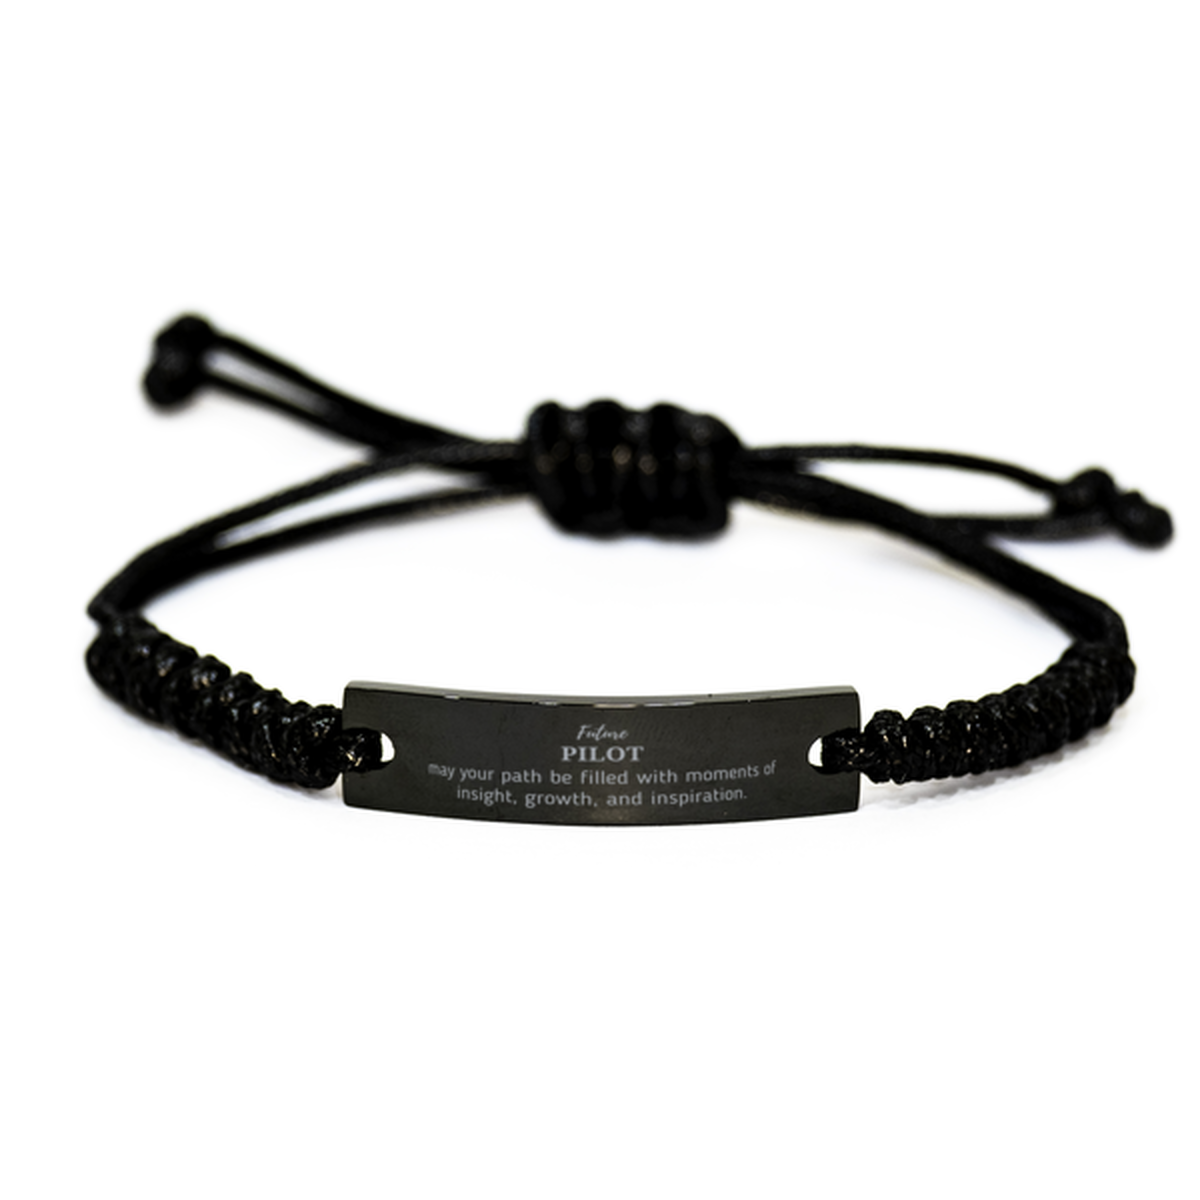 Future Pilot Gifts, May your path be filled with moments of insight, Graduation Gifts for New Pilot, Christmas Unique Black Rope Bracelet For Men, Women, Friends